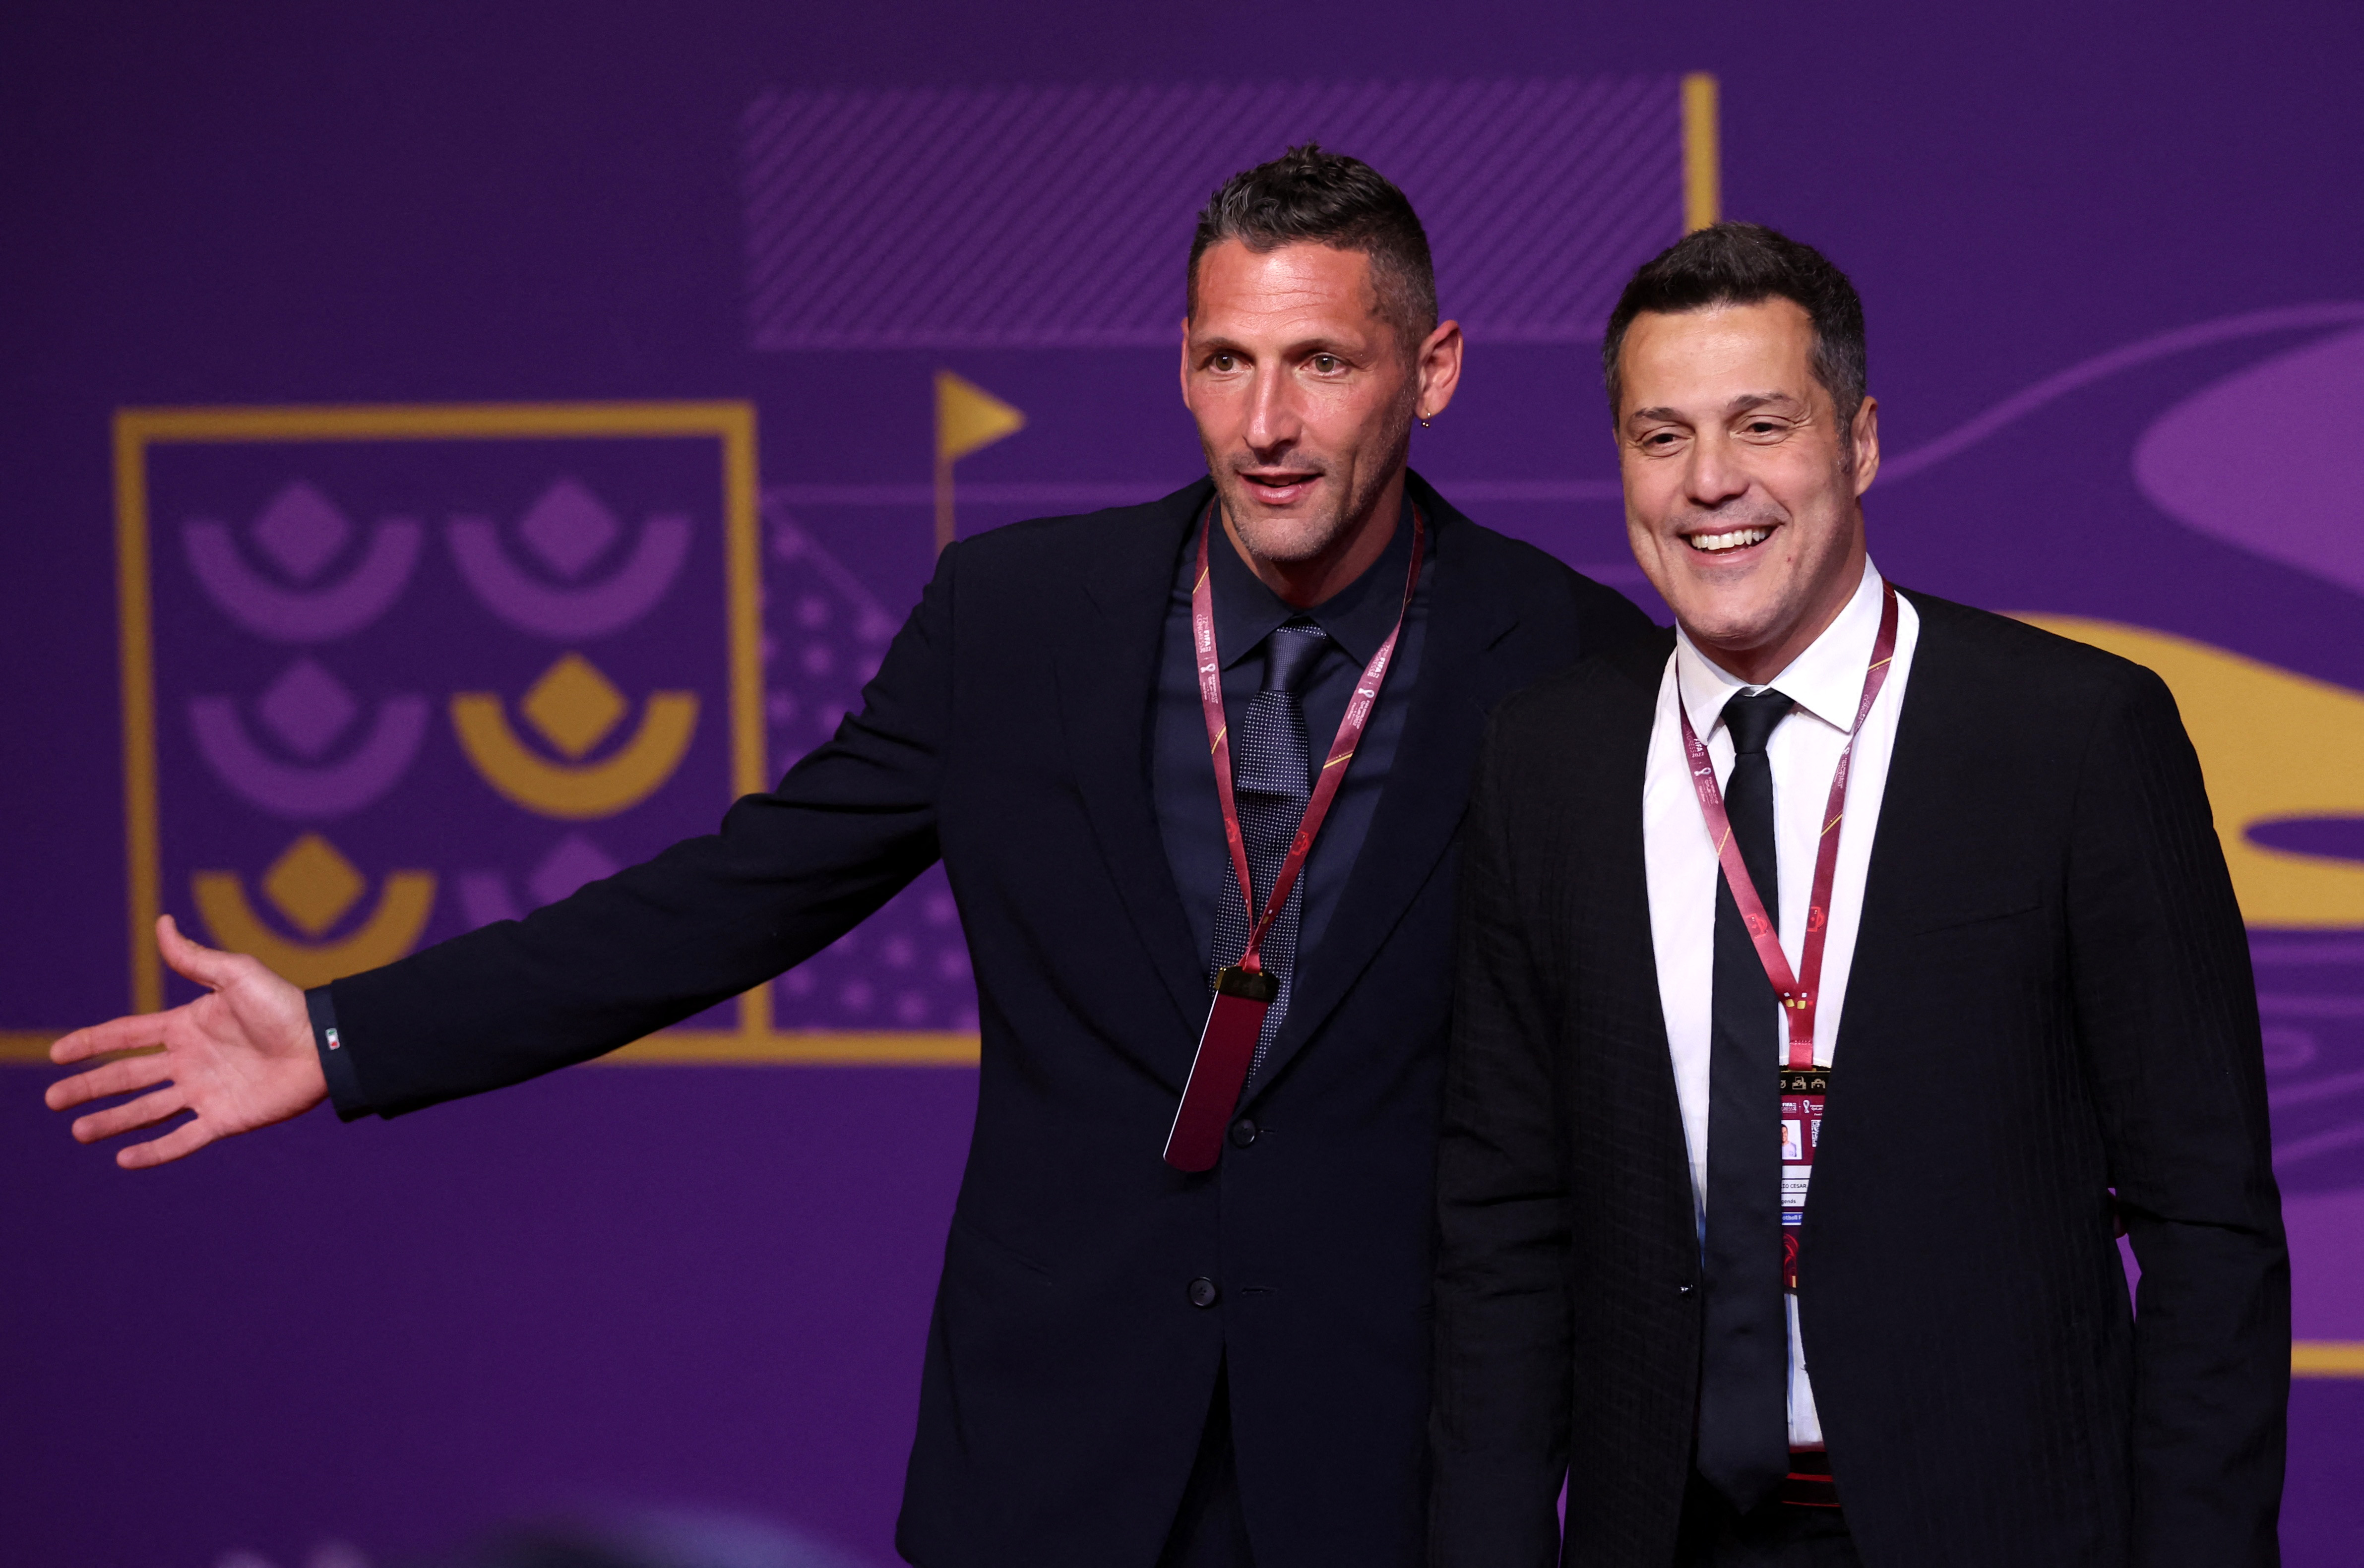 Soccer Football - World Cup - Final Draw - Doha Exhibition & Convention Center, Doha, Qatar - April 1, 2022 Former player Julio Cesar and Marco Materazzi arrive ahead of the draw REUTERS/Carl Recine